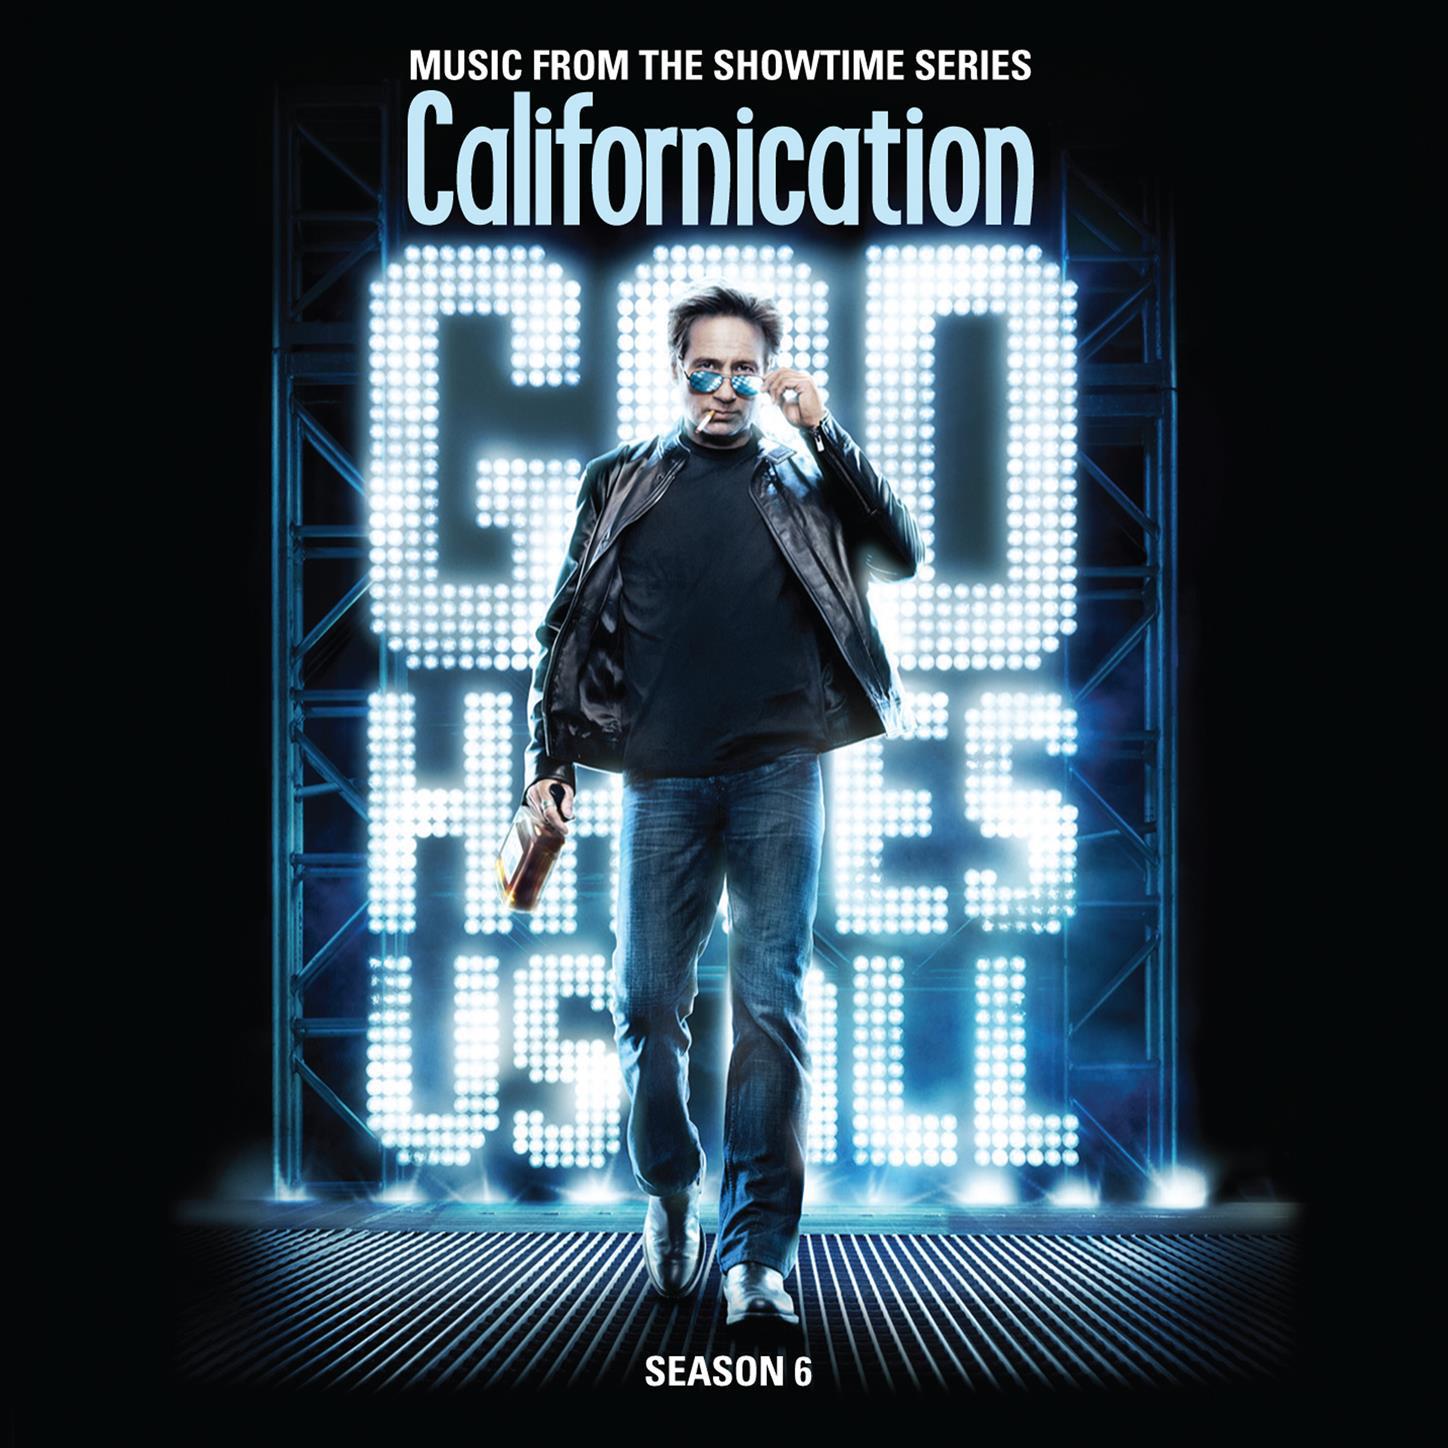 Music From The Showtime Series Californication Season 6